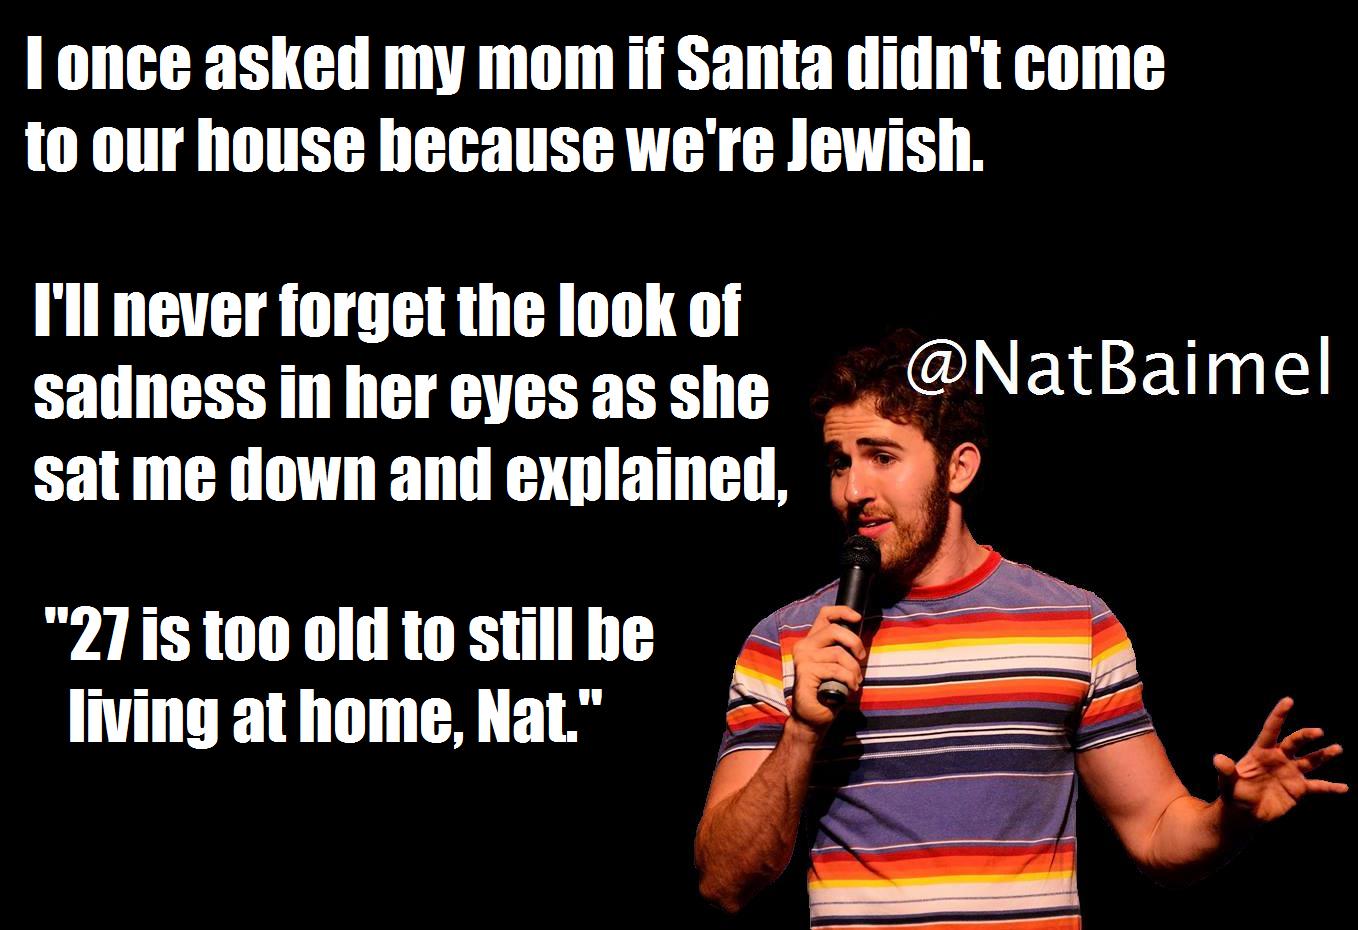 minorities funny moments - Tonce asked my mom if Santa didn't come to our house because we're Jewish. I'll never forget the look of sadness in her eyes as she sat me down and explained, "27 is too old to still be living at home, Nat."